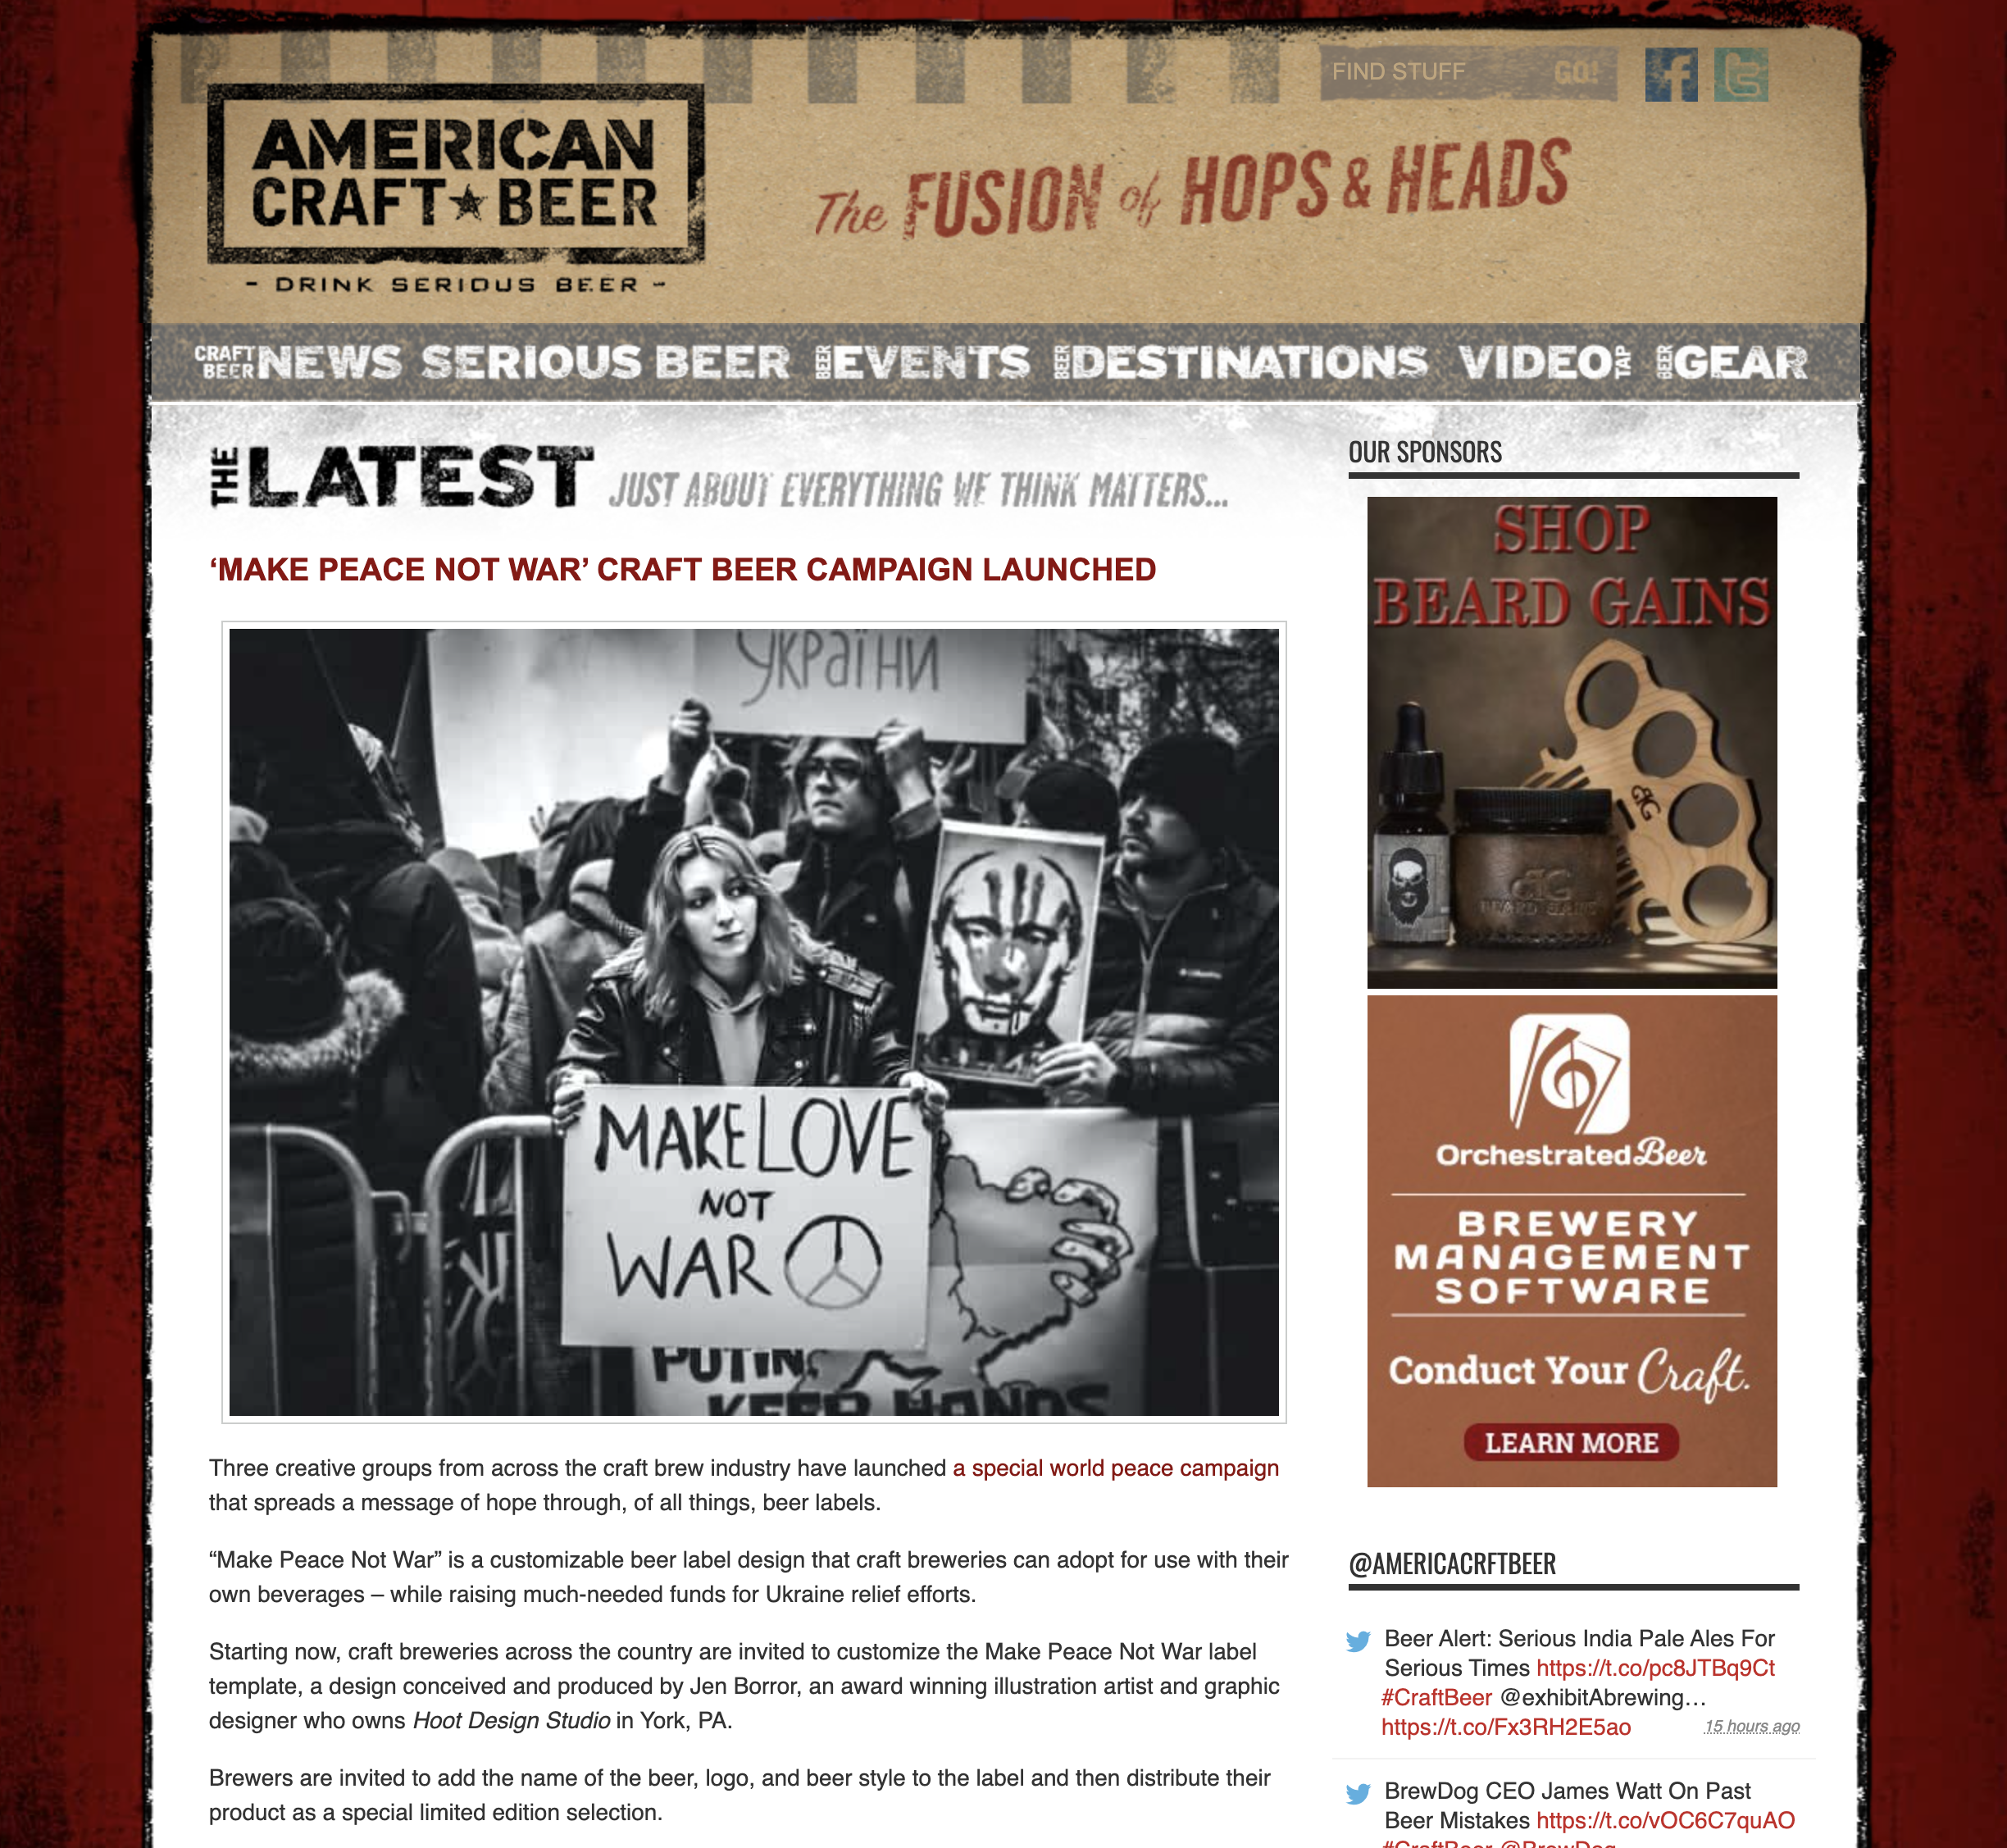 American Craft Beer - Press release peace not war campaign